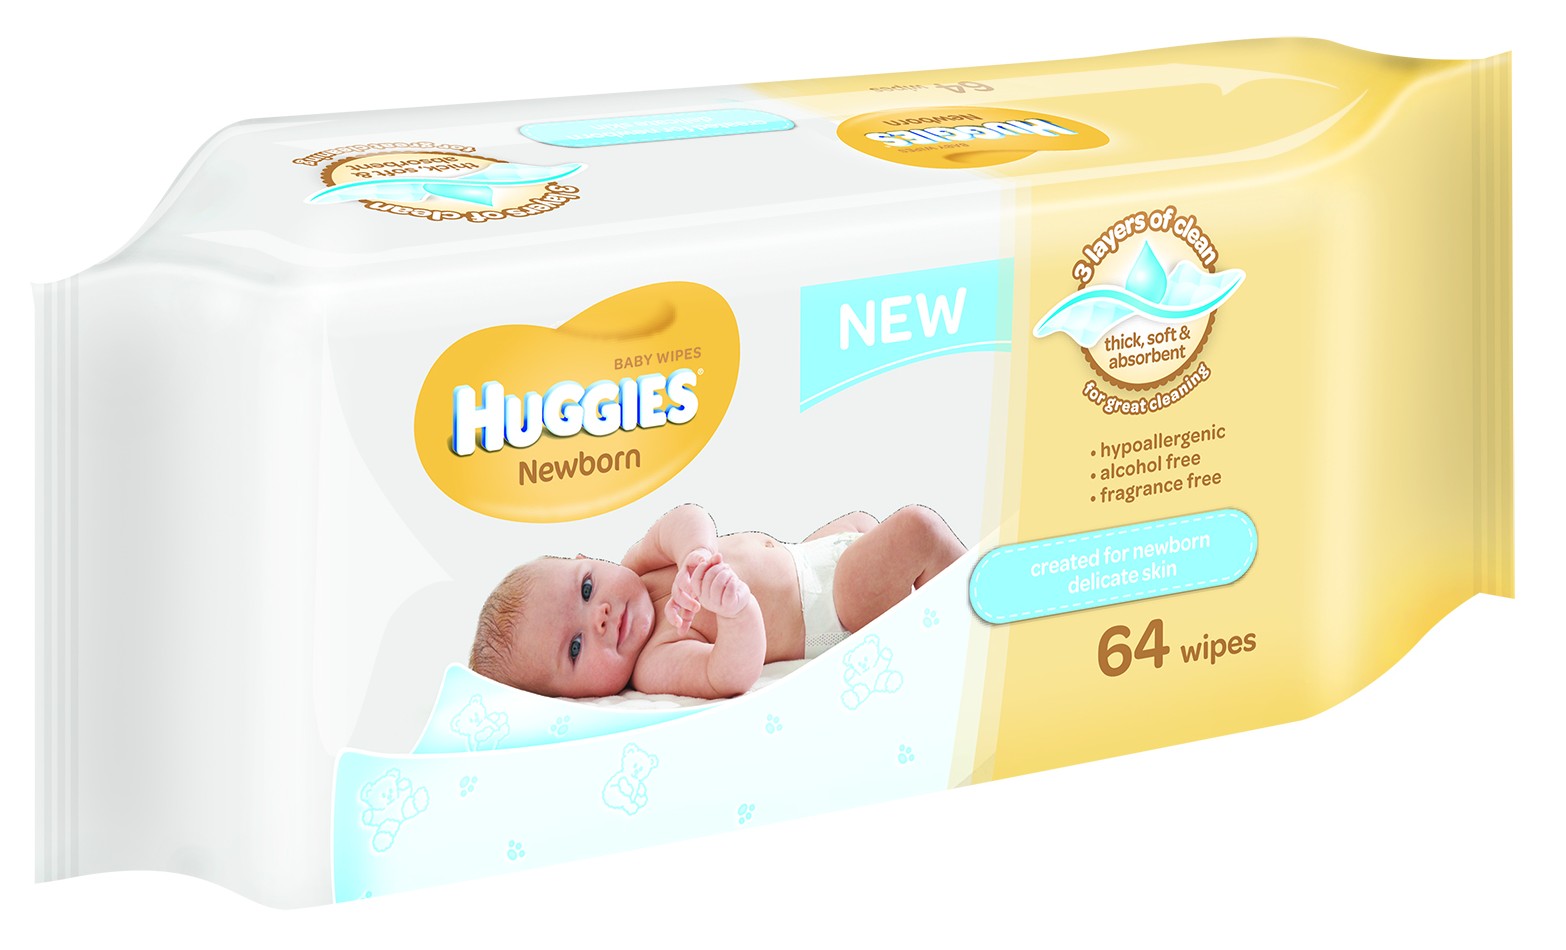 21 Uses For Baby Wipes - What do you 